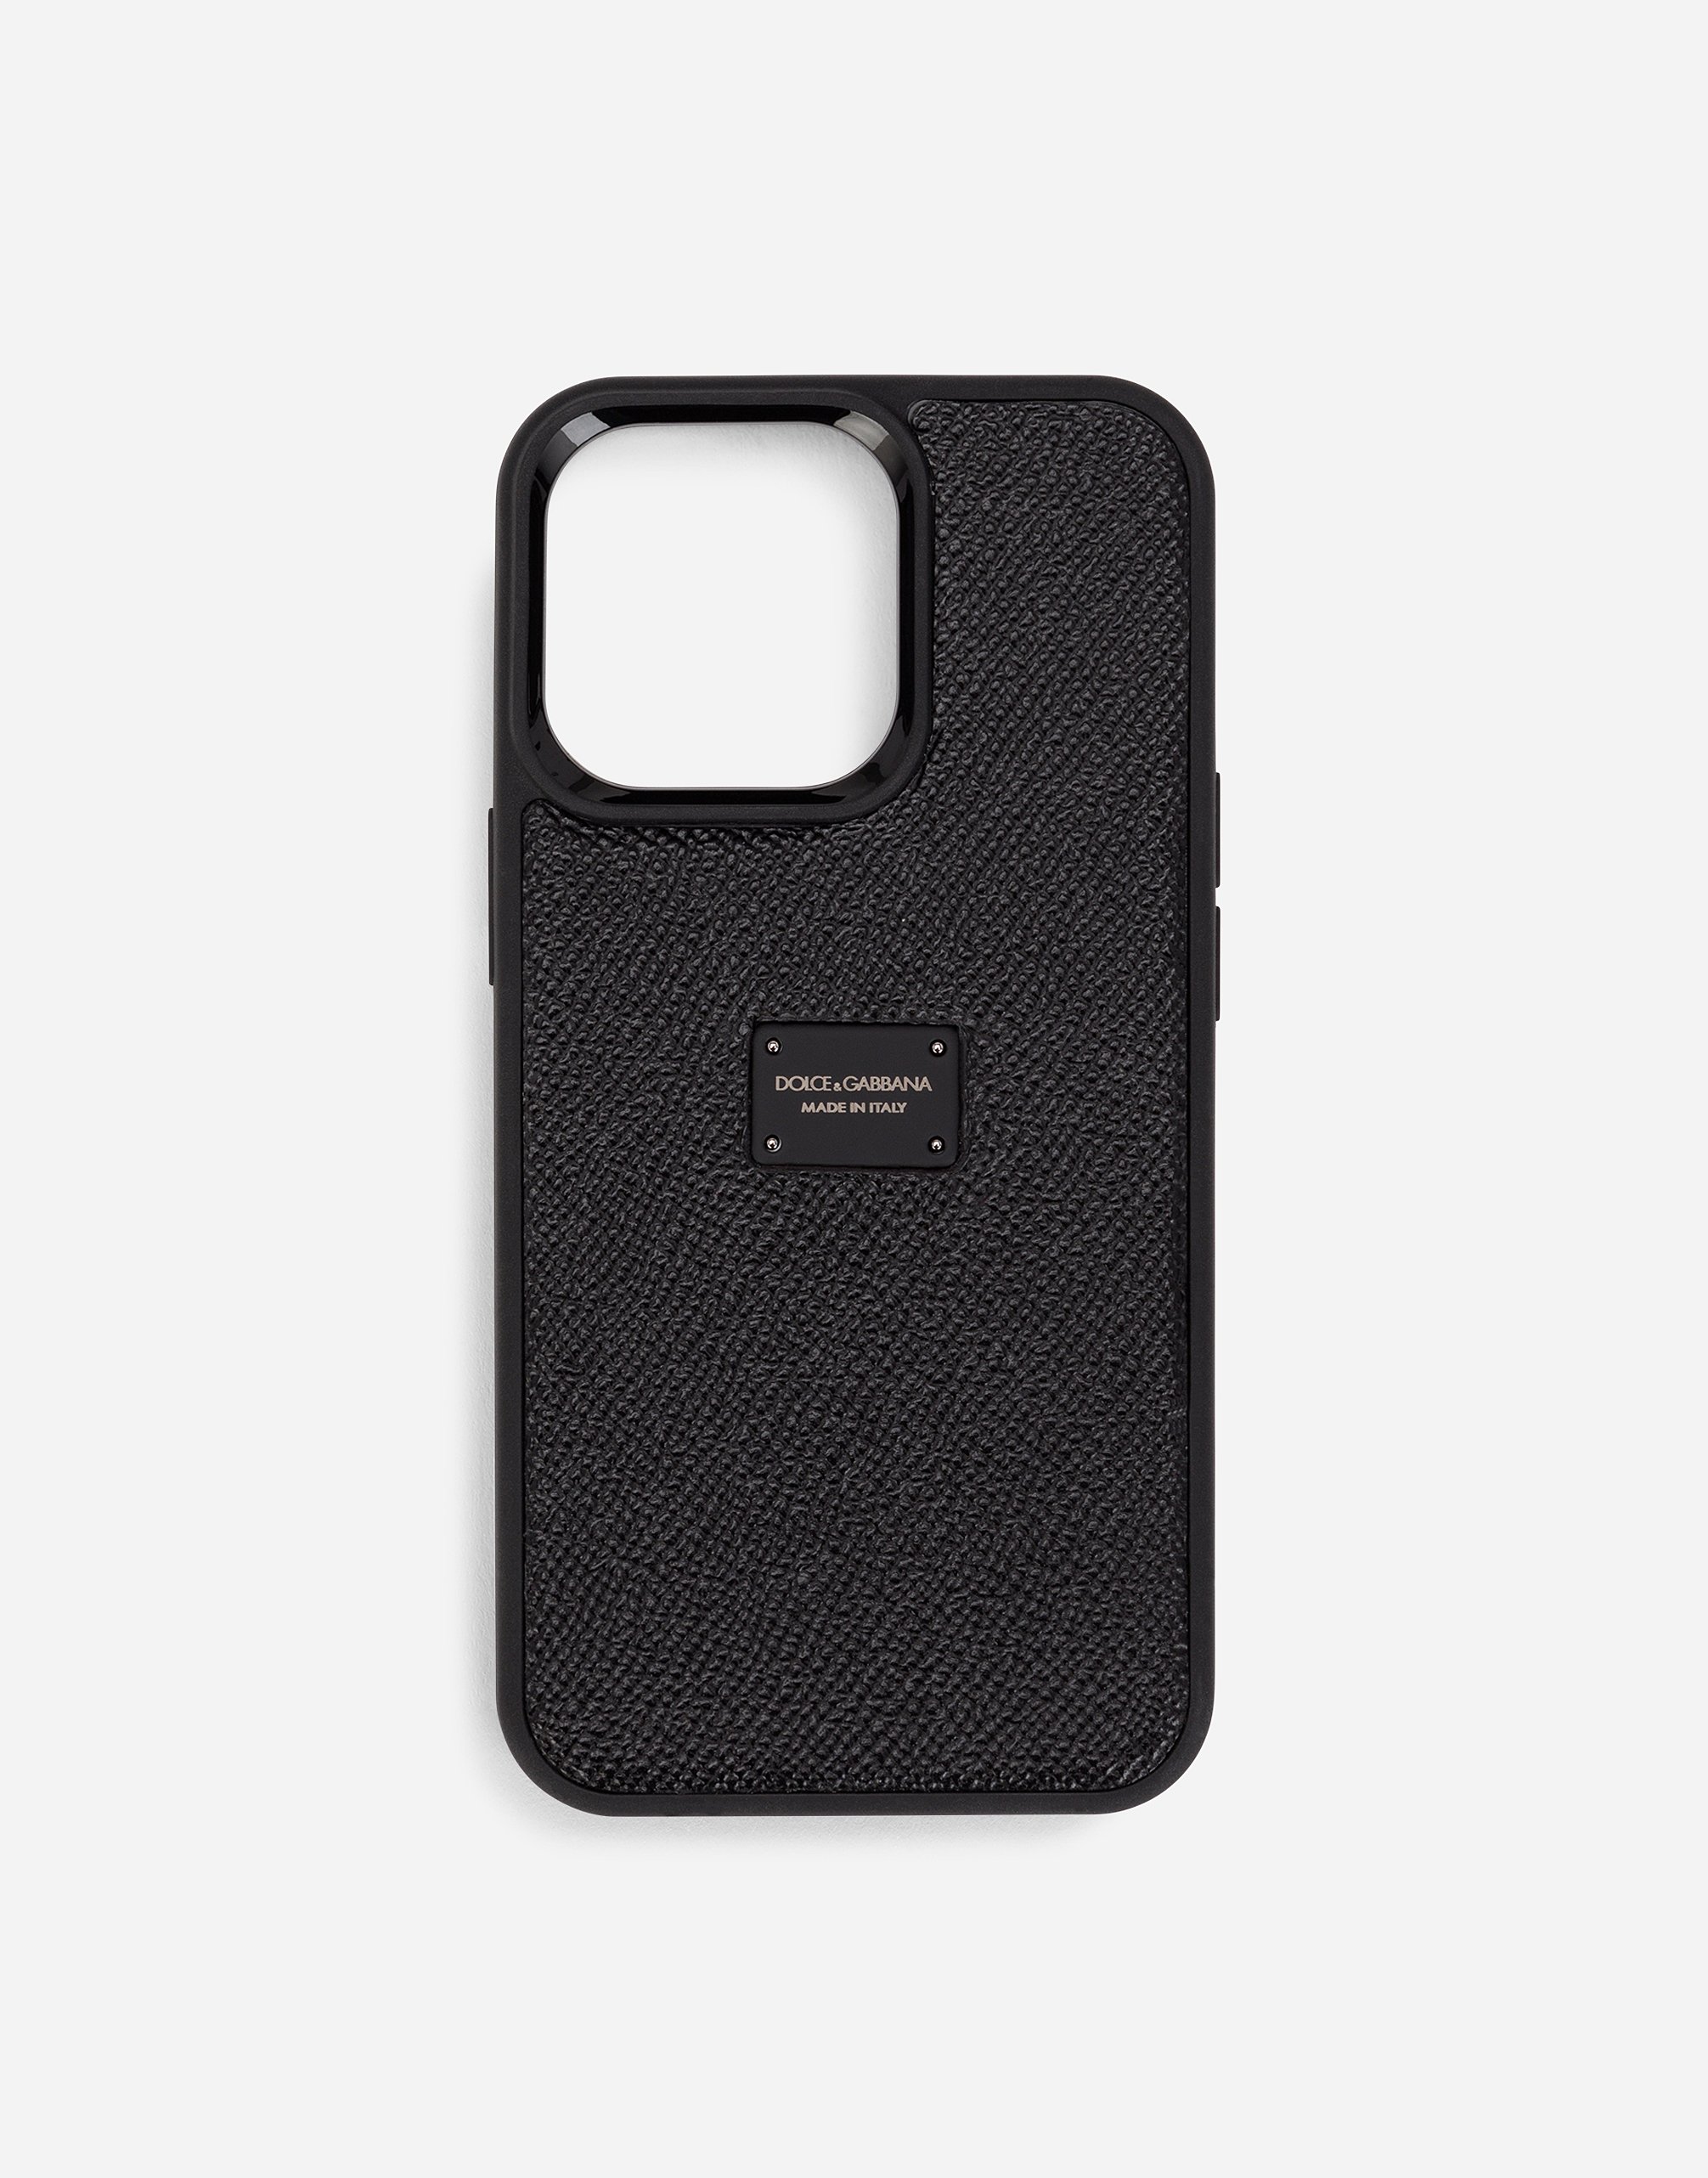 Dauphine calfskin and rubber 13 Pro cover in Black